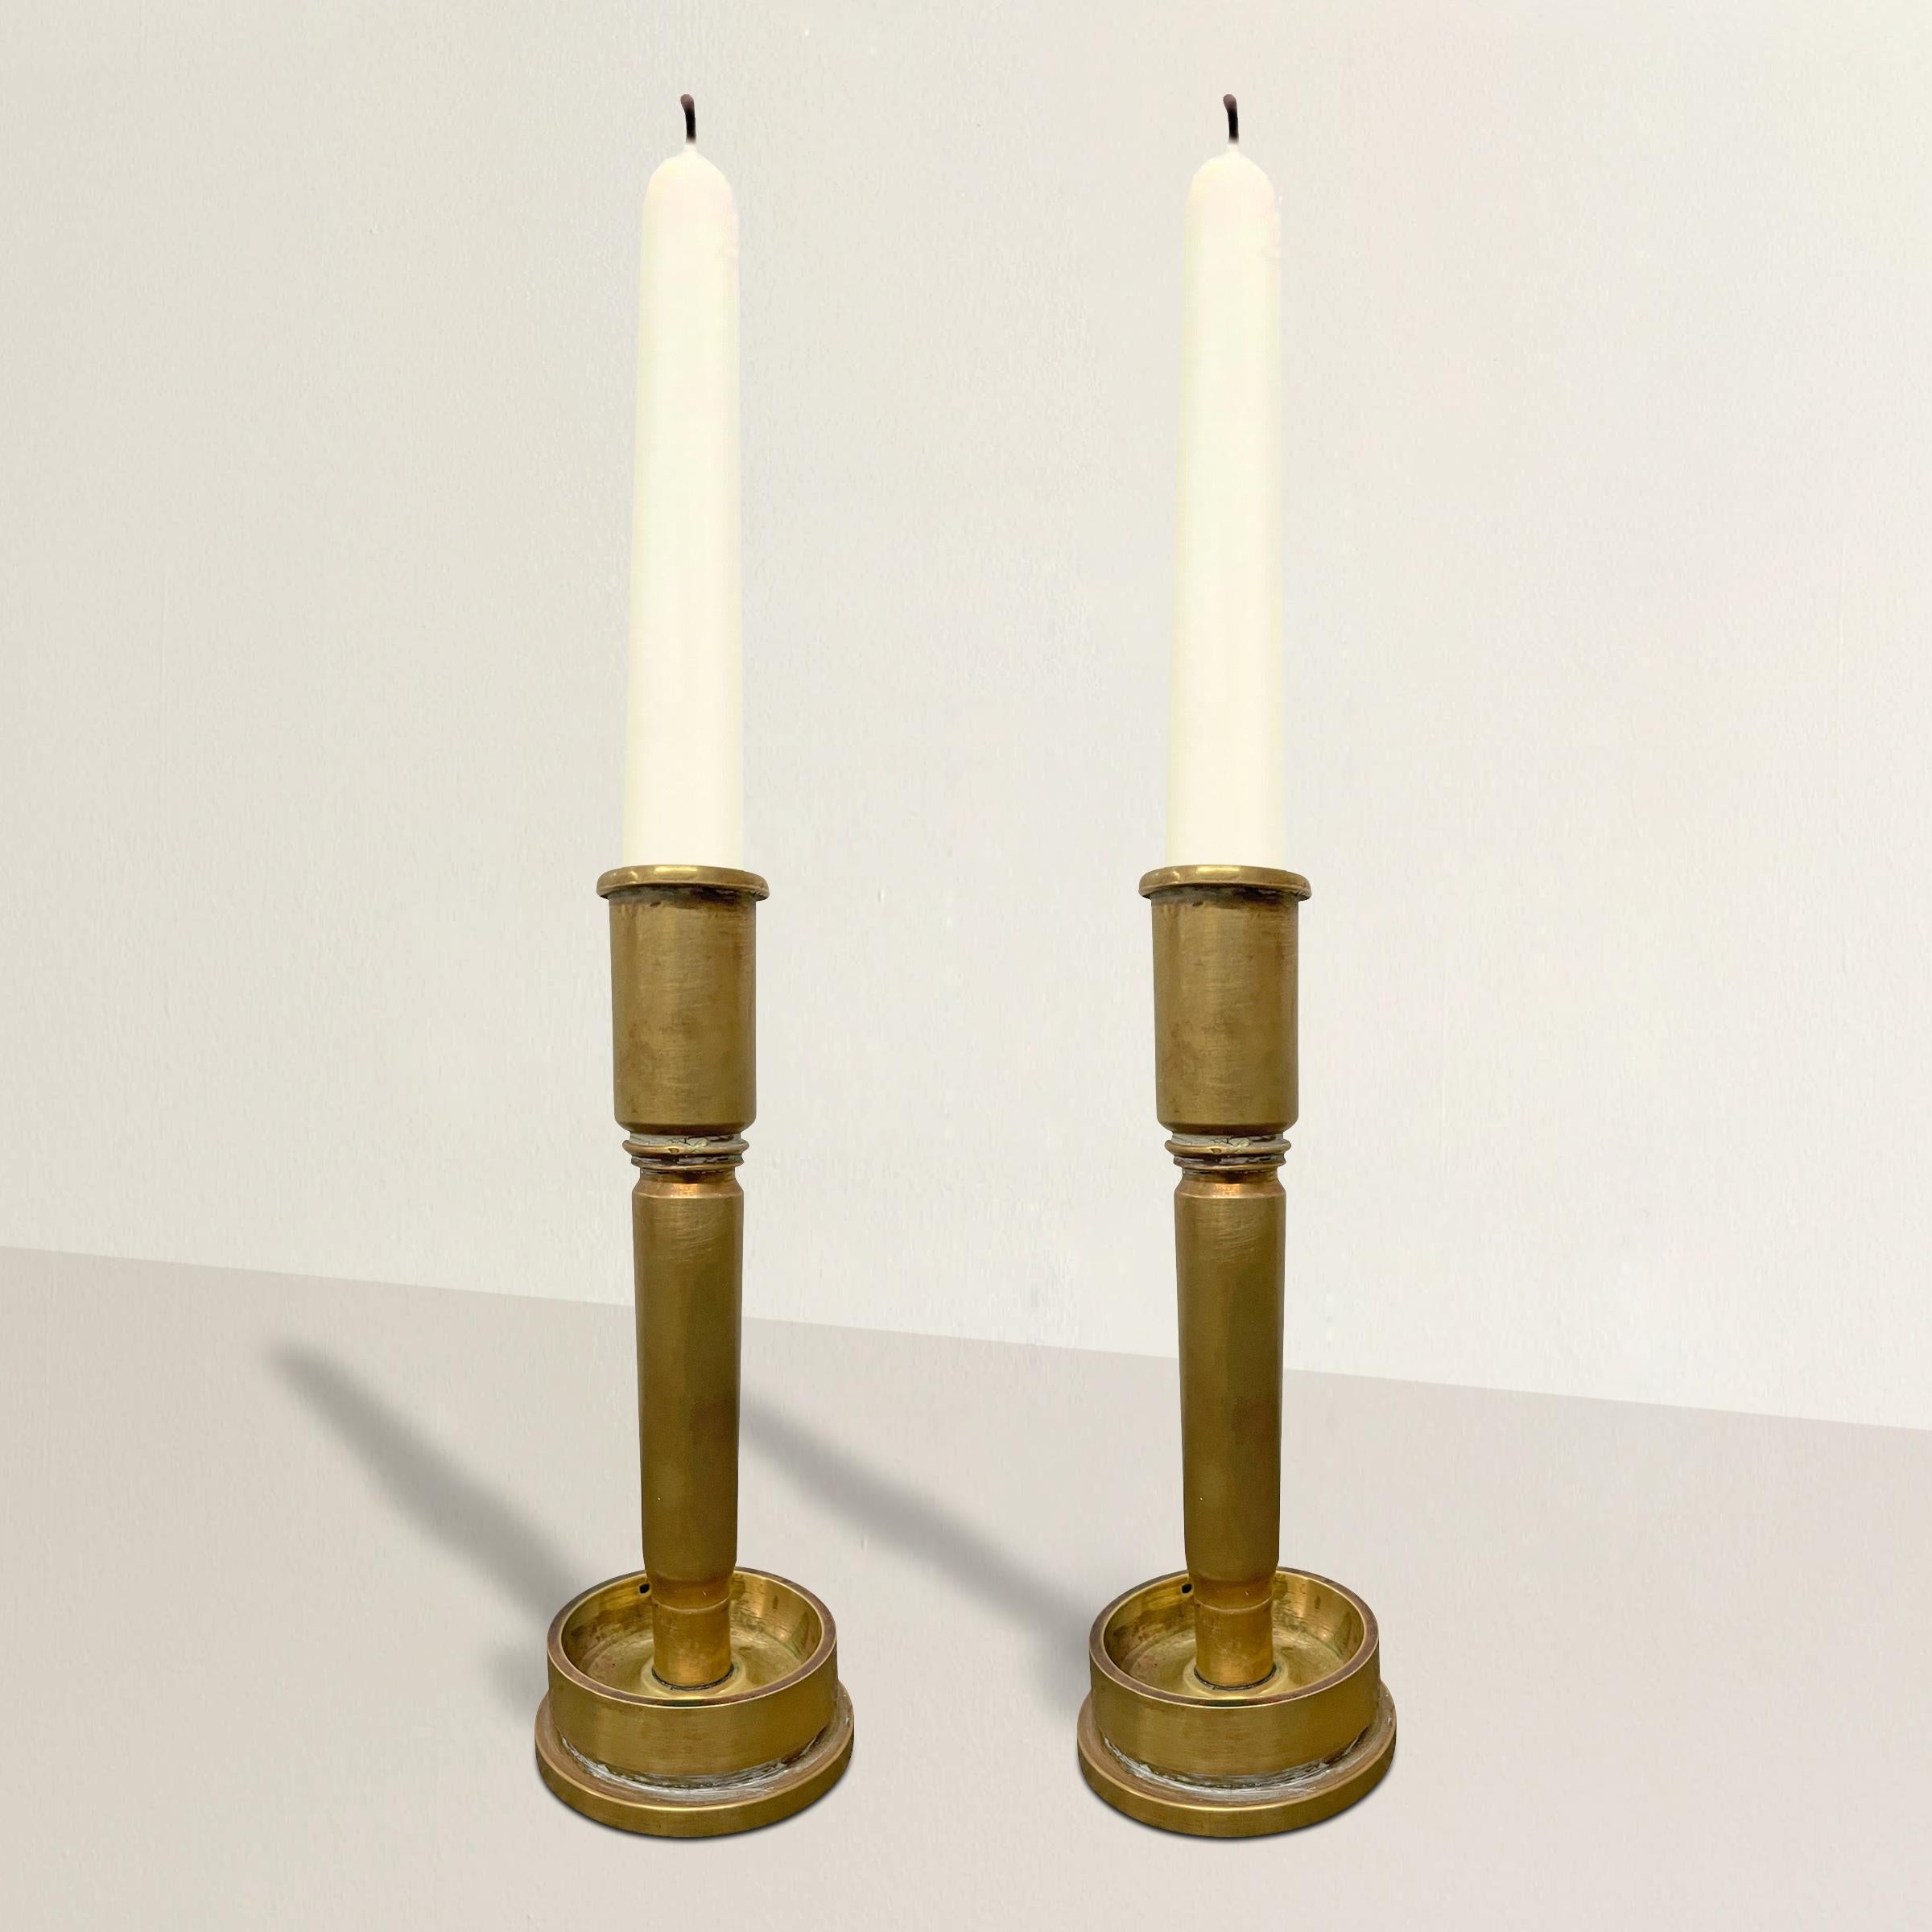 A wonderful and thought provoking pair of early 20th century American Trench Art candlesticks made from the spent brass casings of naval artillery shells.